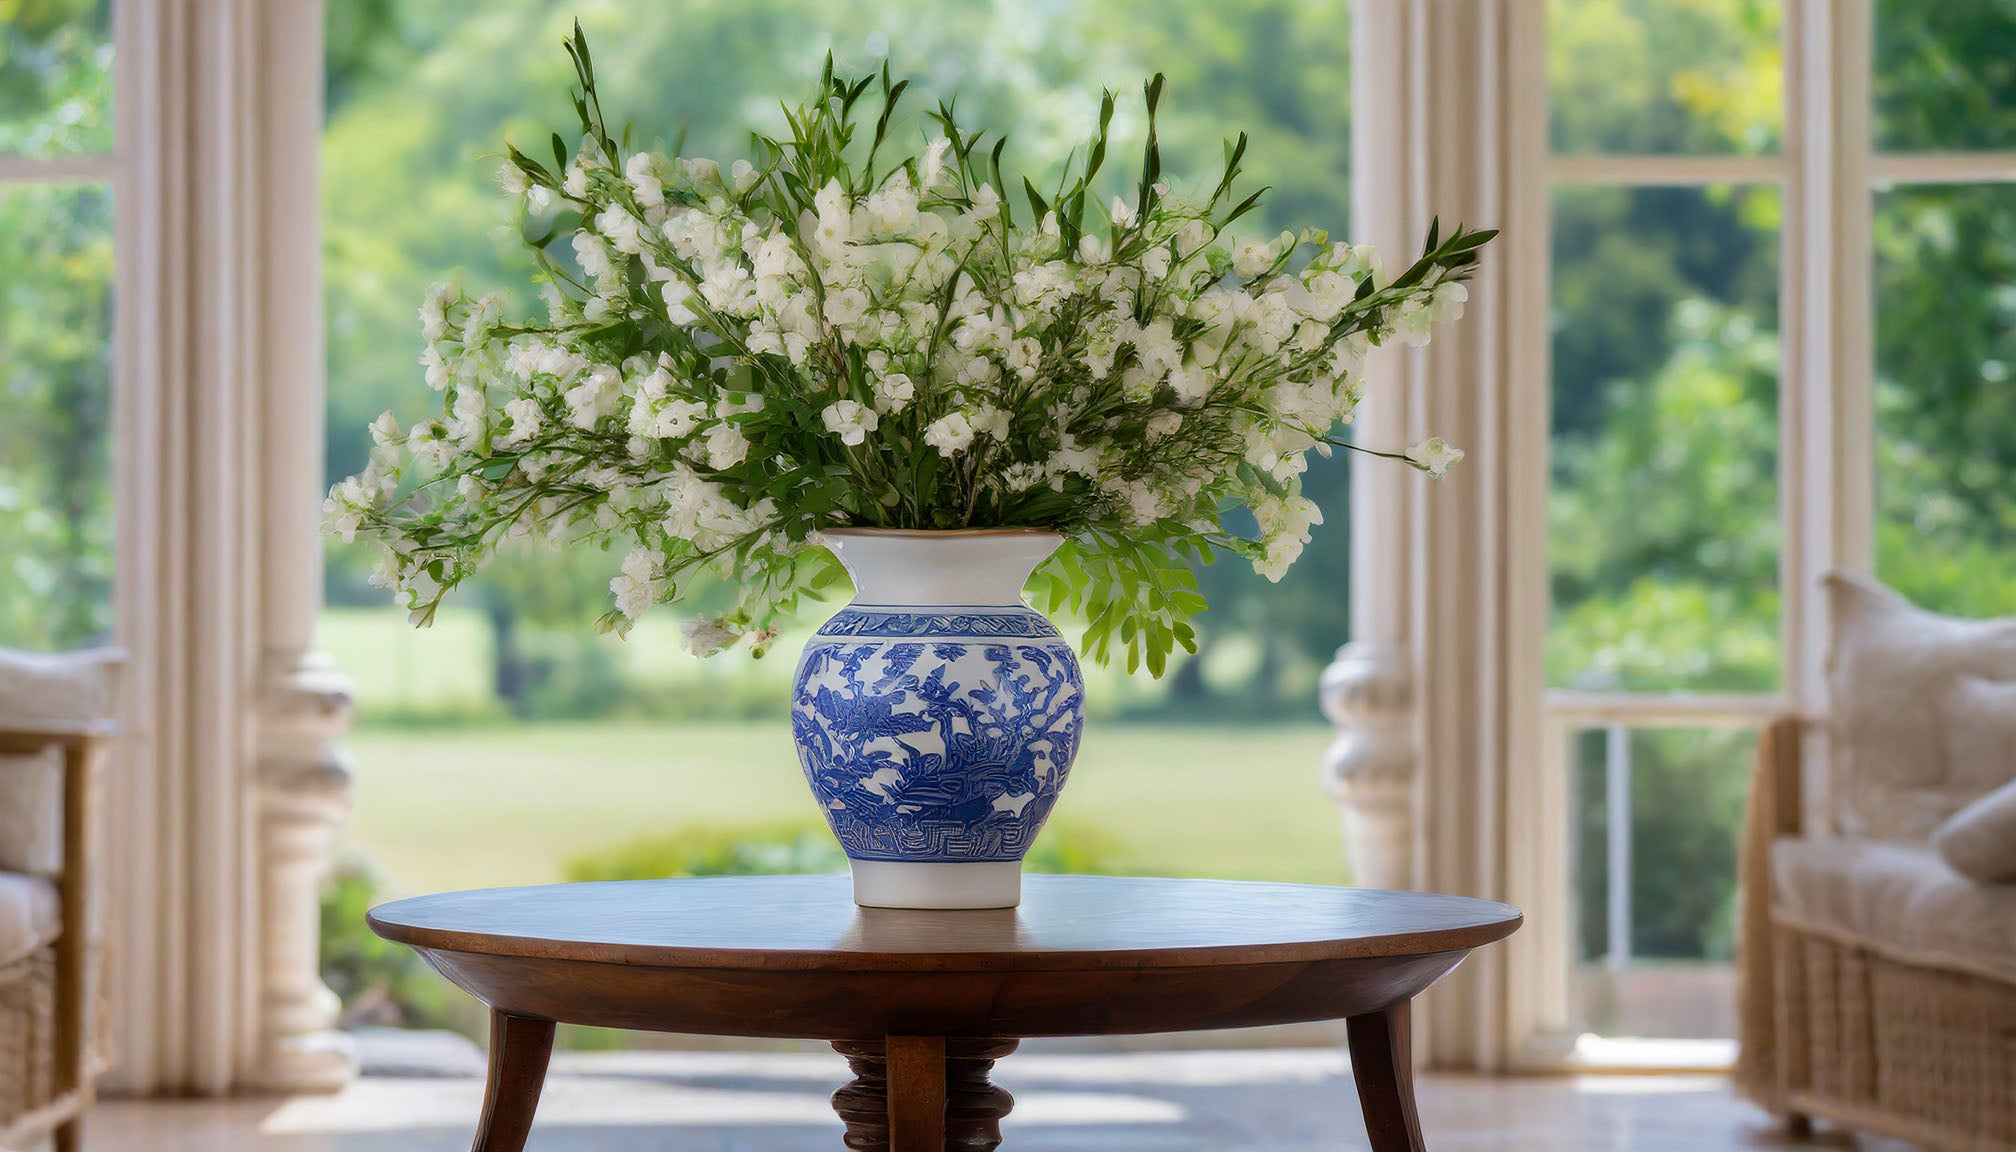 Transitional interior design style with Chinese blue and white porcelain vase filled with botanicals on pedestal table.